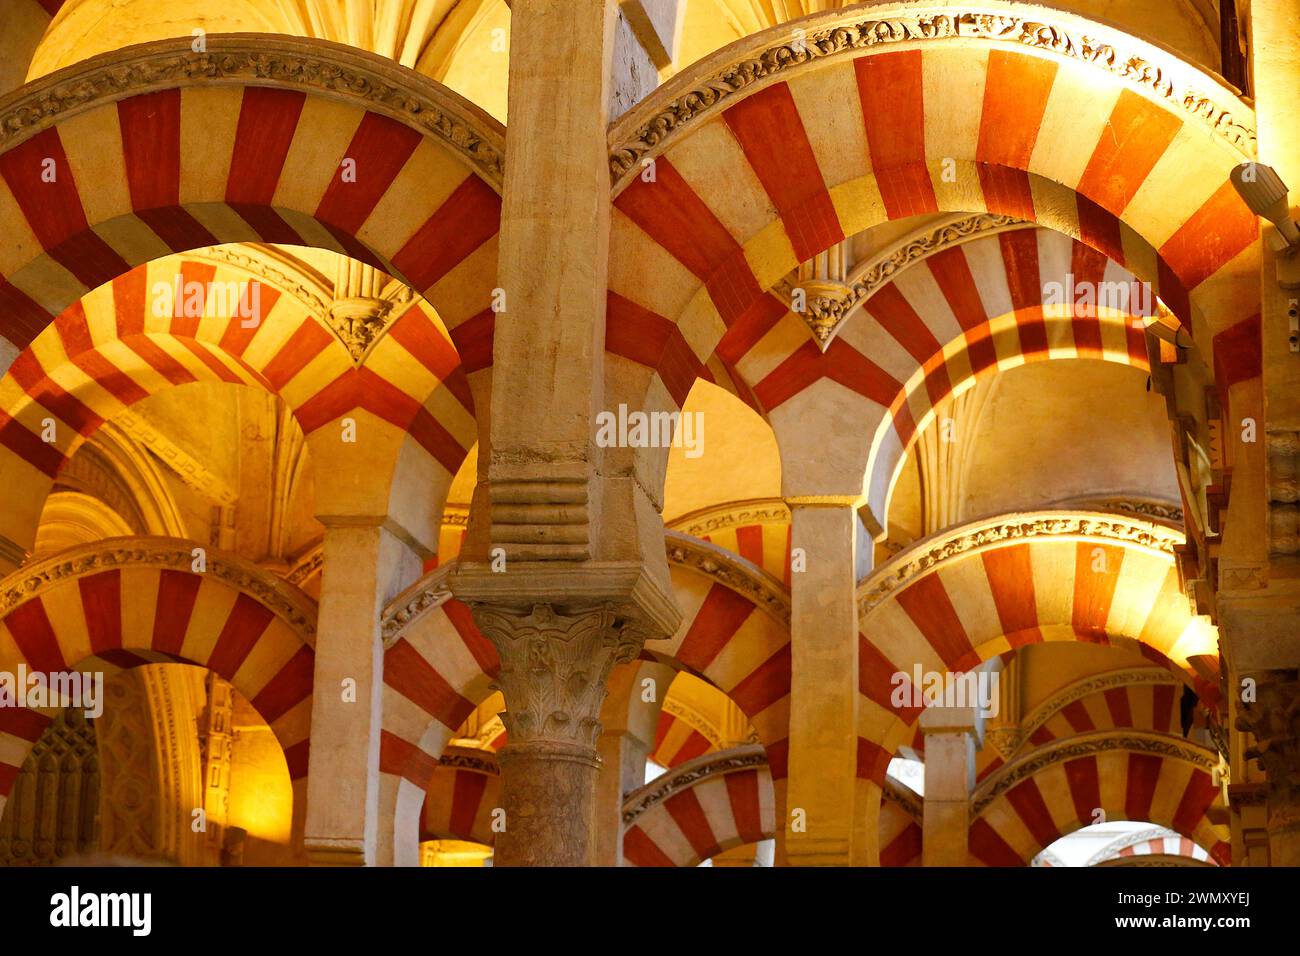 Mosque?Cathedral of Cordoba. The columns and two-tiered arches in the original section of the mosque building. Spain Stock Photo